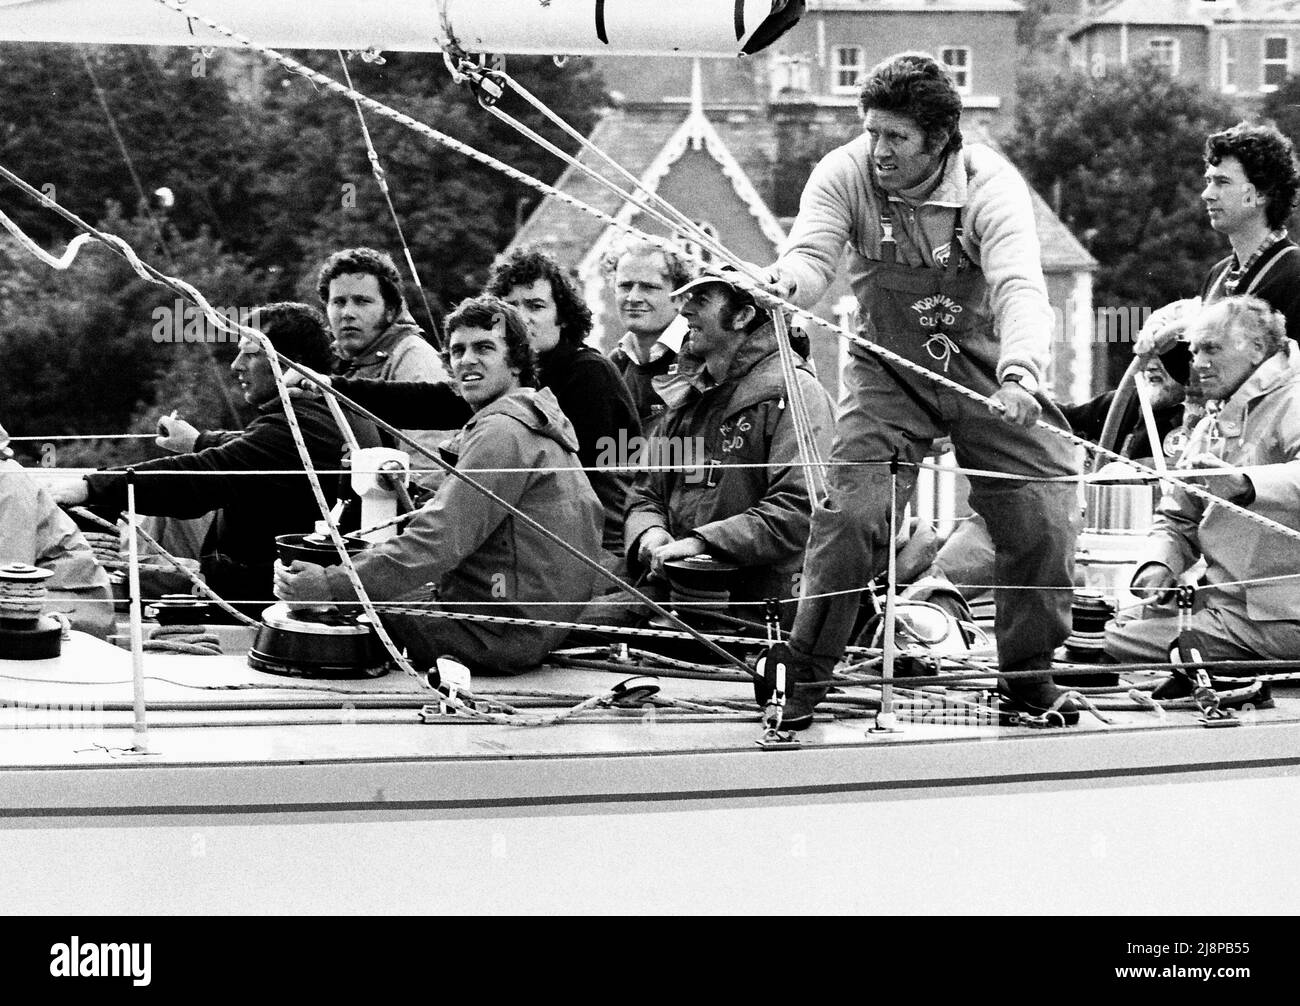 AJAXNETPHOTO. AUGUST, 1981. - COWES WEEK RACING - MORNING CLOUD IV OWNER EDWARD HEATH SAILING ADVISER OWEN PARKER SEEN ON DECK THIRD FROM RIGHT PULLING HALYARD. DESIGNER RON HOLLAND IS HELMING YACHT. PHOTO:JONATHAN EASTLAND/AJAX REF:780708 1  67 Stock Photo